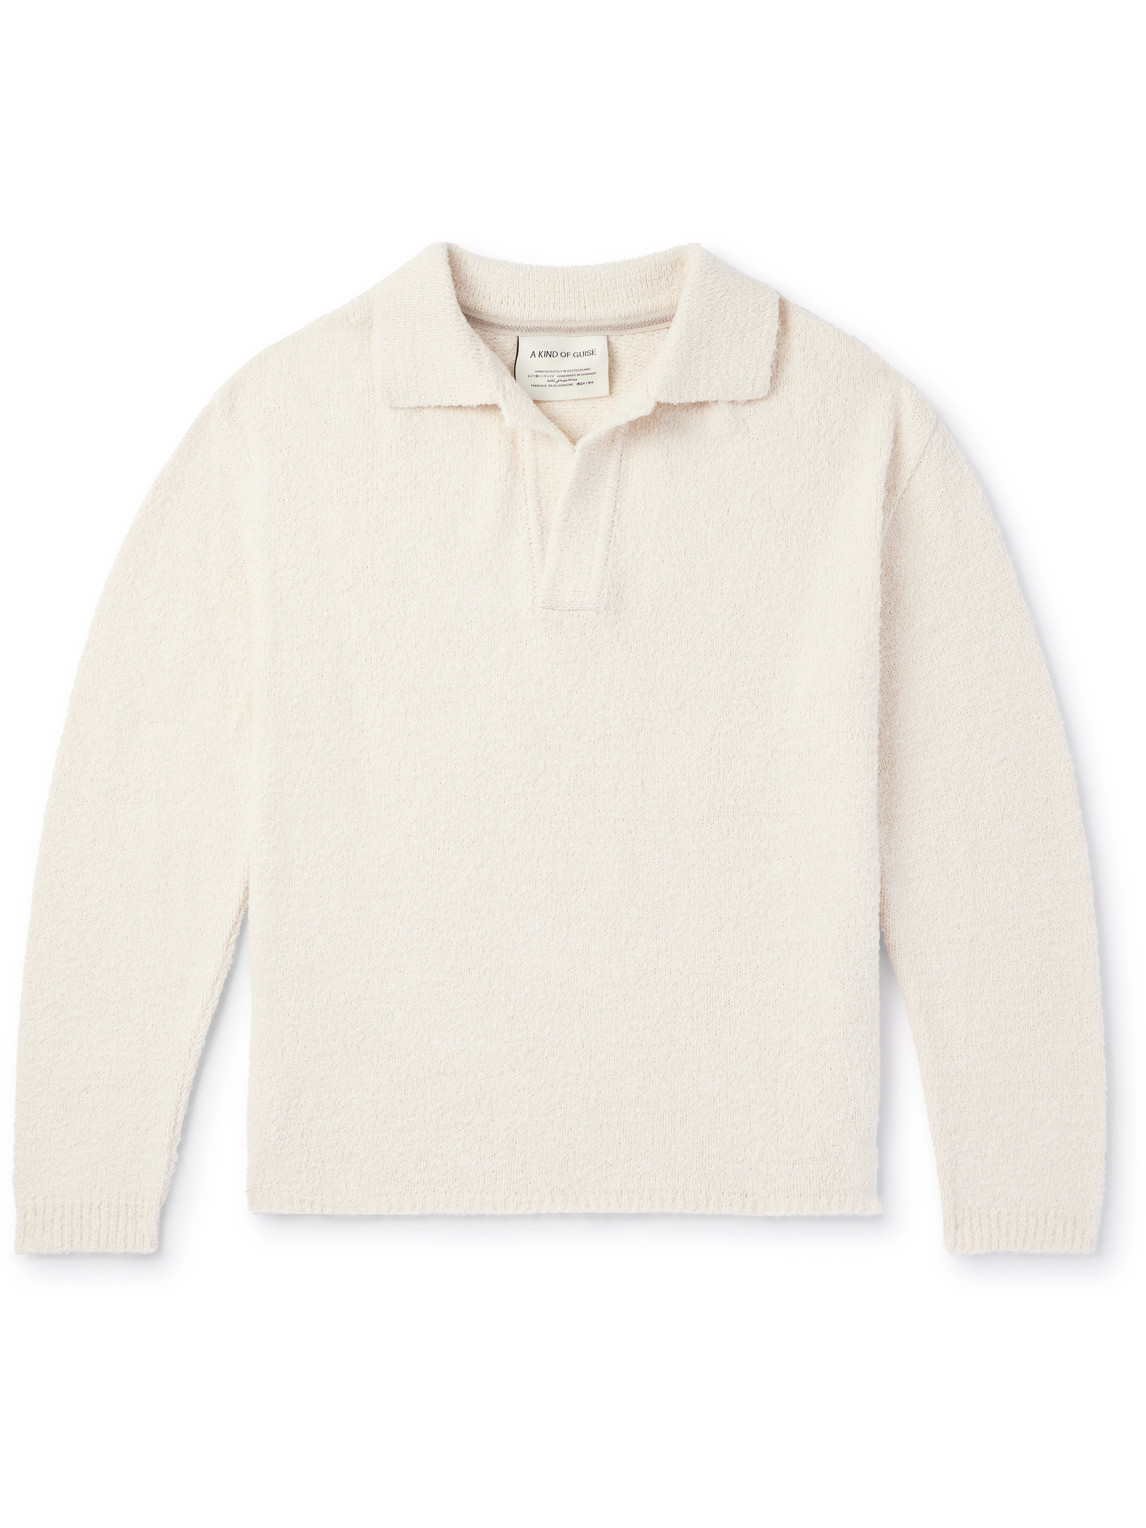 A Kind Of Guise Brushed Organic Cotton Jumper In White